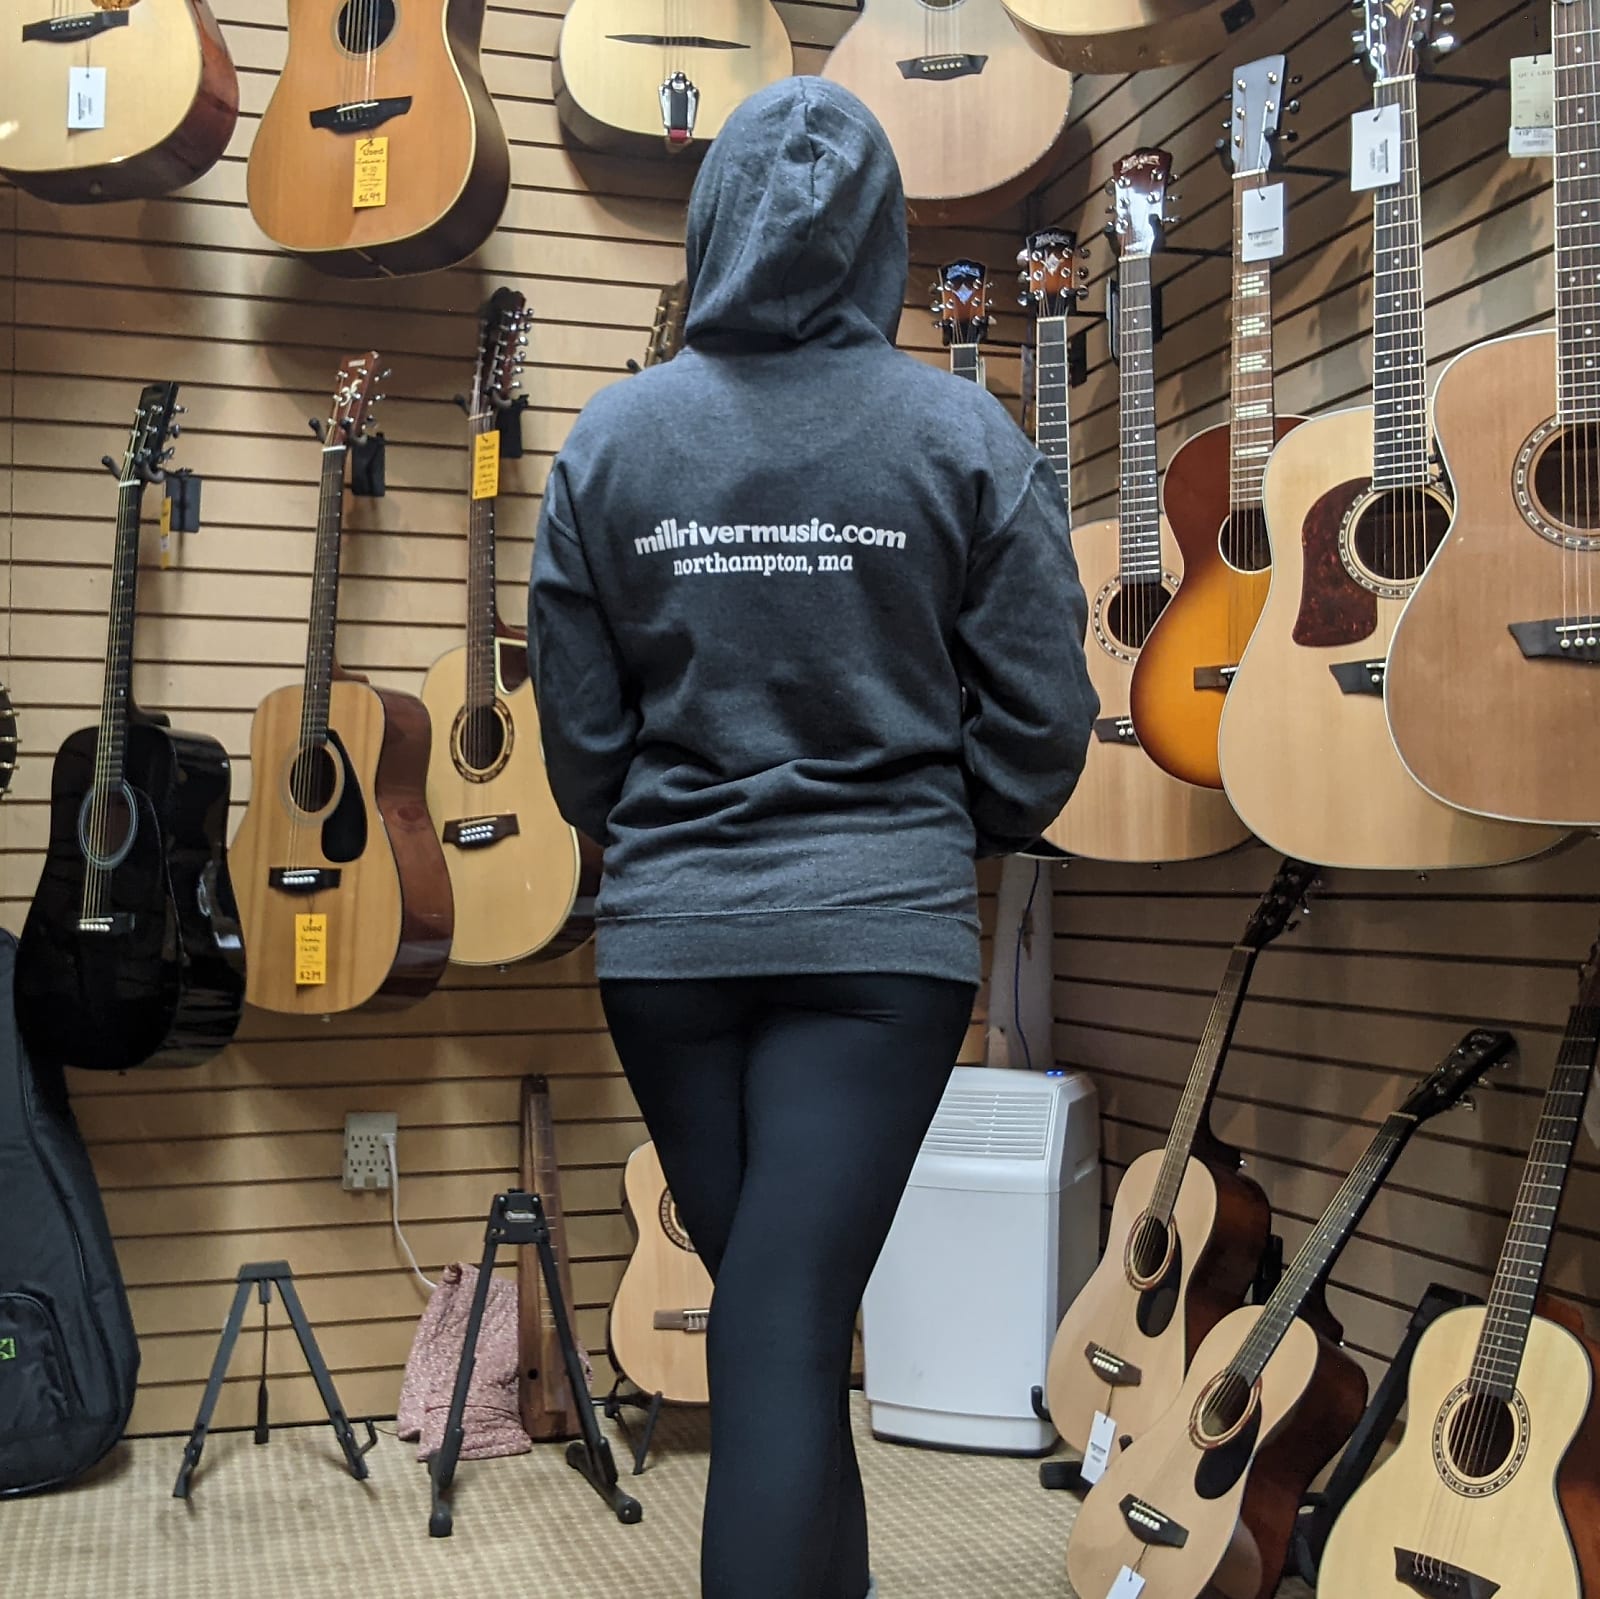 Mill River Music Zip Hoodie 1st Edition Main Logo Unisex Charcoal Heather Small